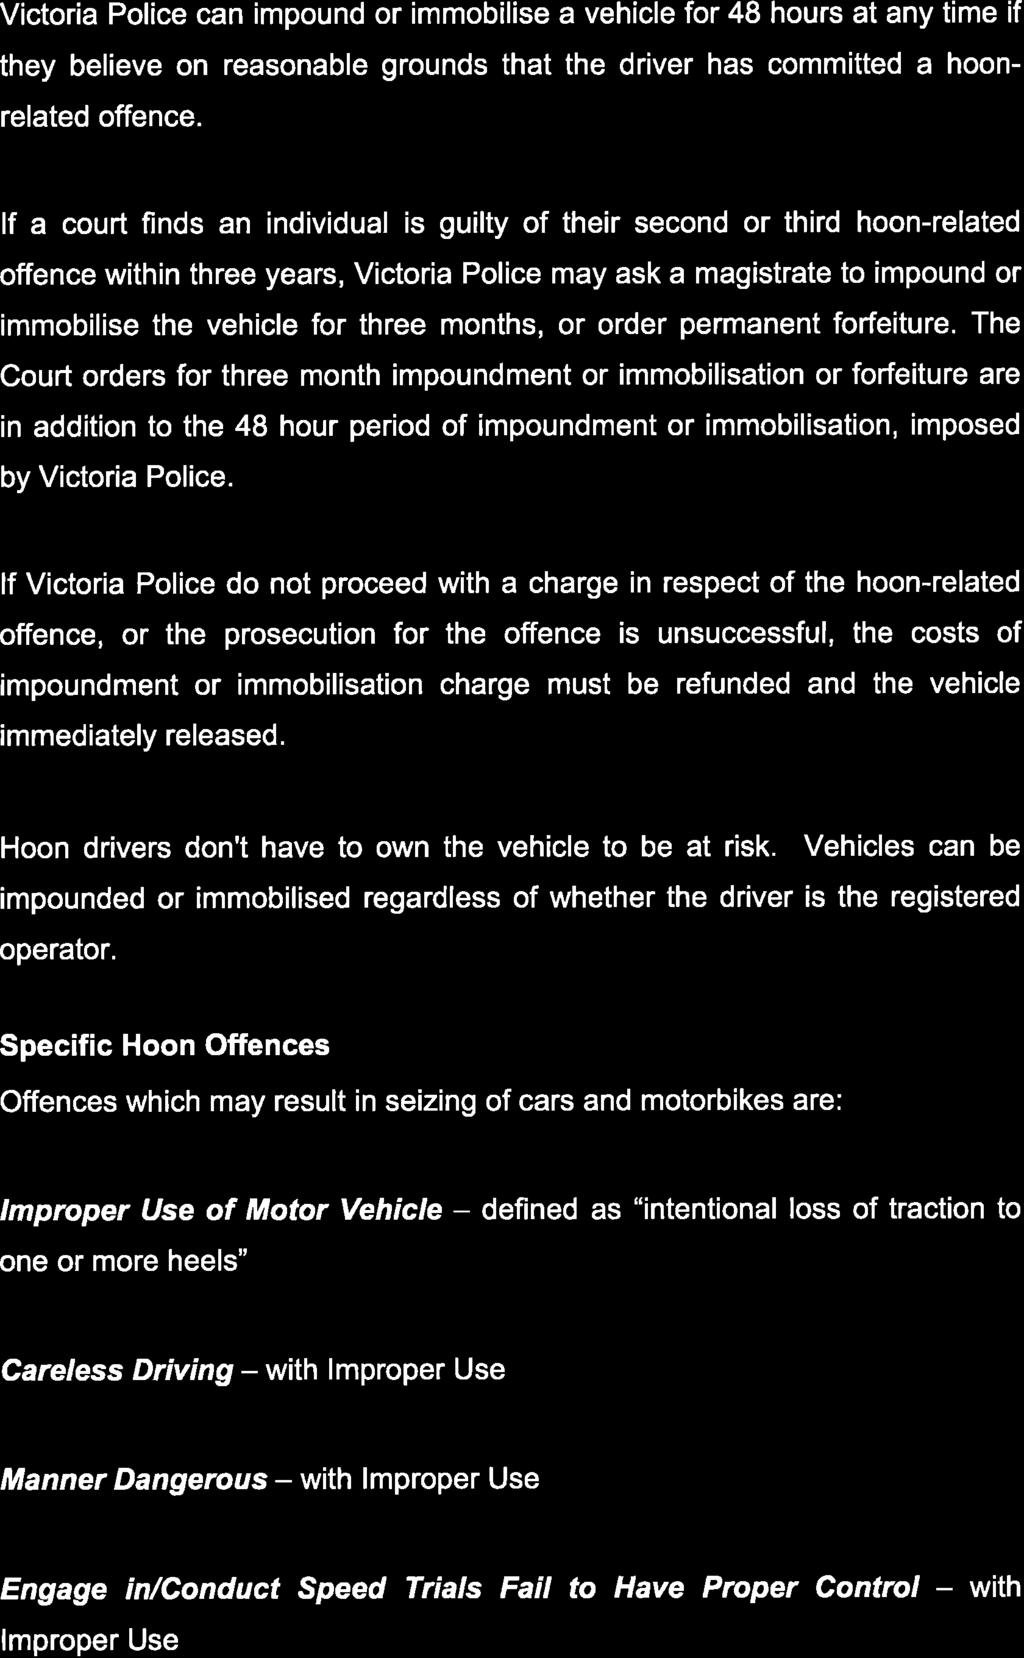 Victoria Police can impound or immobilise a vehicle for 48 hours at any time if they believe on reasonable grounds that the driver has committed a hoonrelated offence.